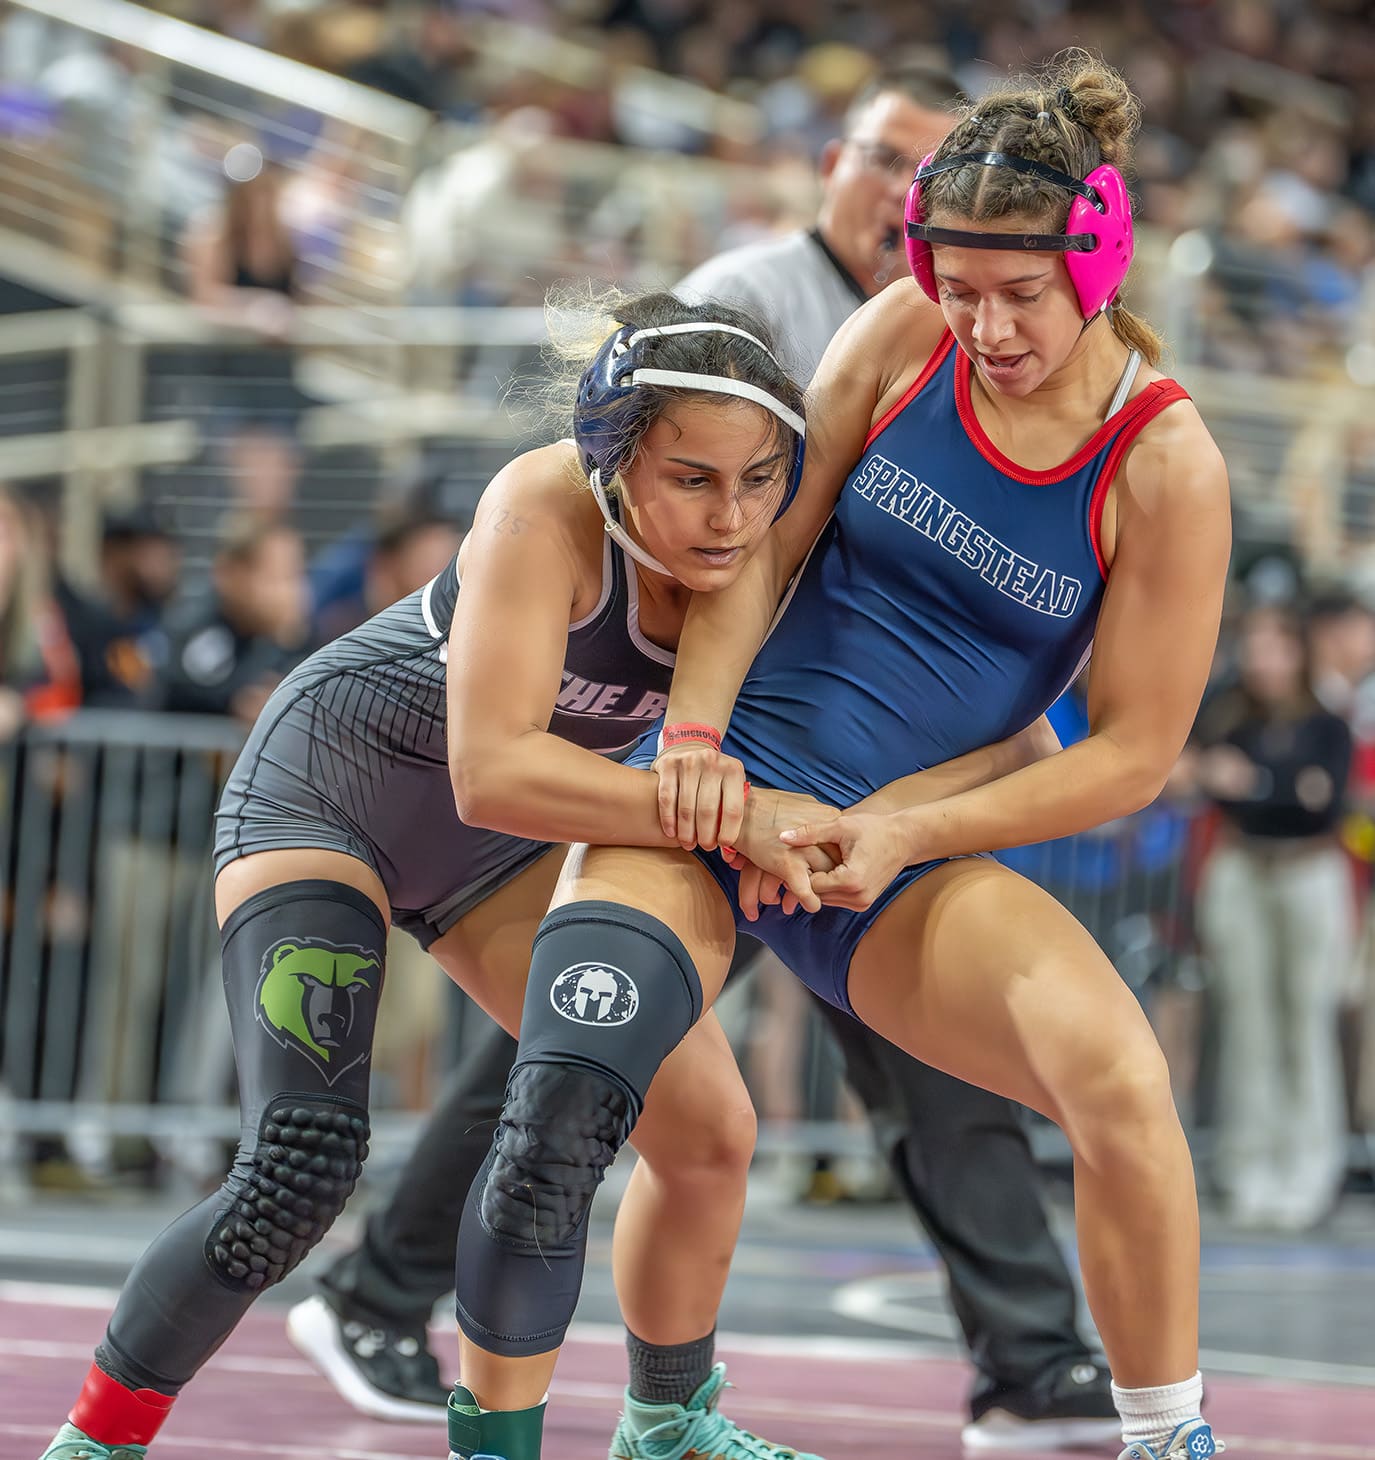 Springstead High 125 pound Jasmine Serrano won by fall over Delenis Rogert at 4:00 in her first round match in the FHSAA State Championships in Kissimmee [Photo by Joe DiCristofalo]